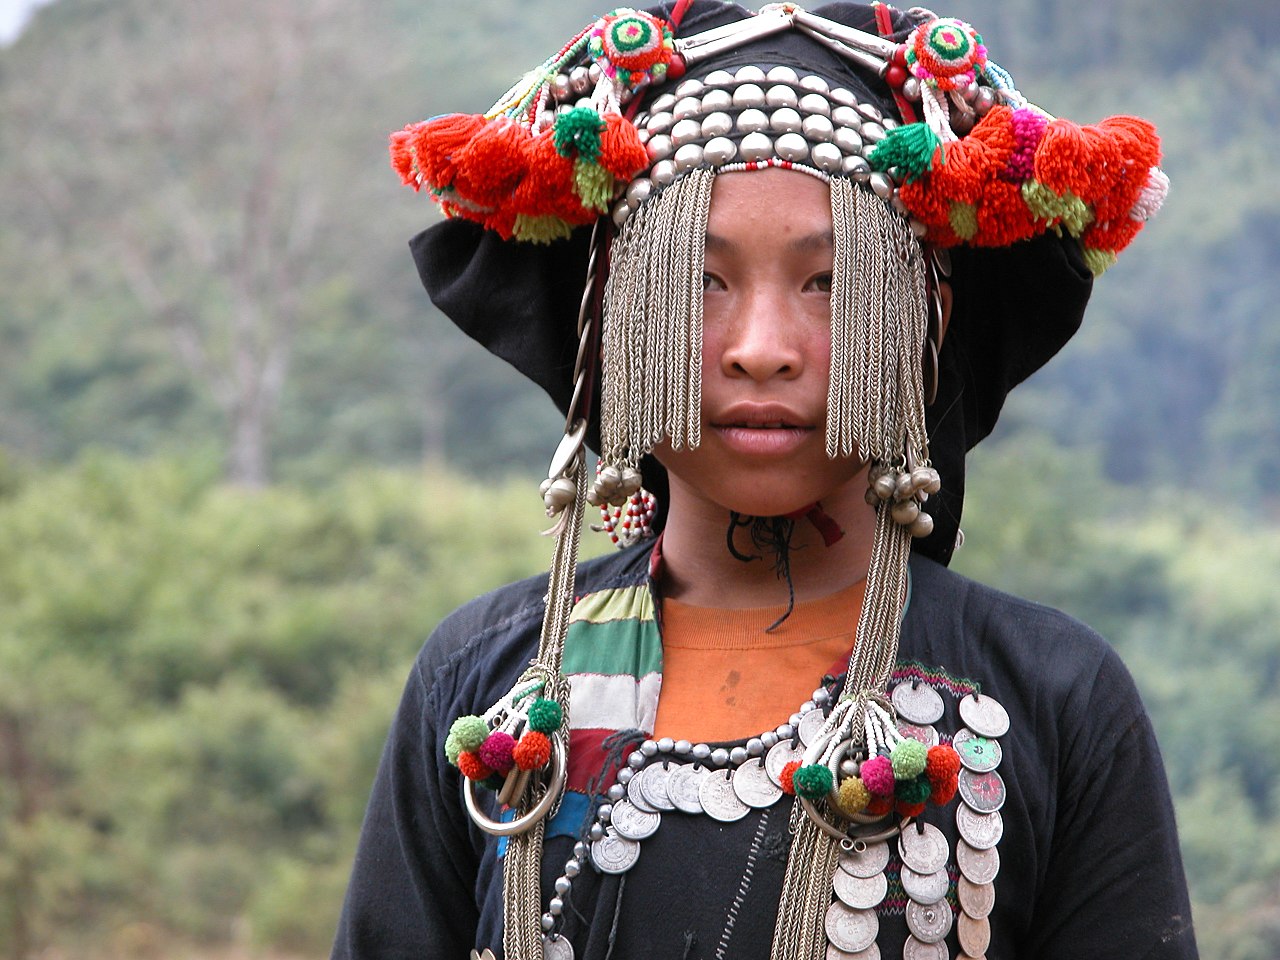 The Akha are an ethnic group who live in small villages at higher elevations in the mountains of Thailand, Myanmar, Laos and Yunnan Province in China